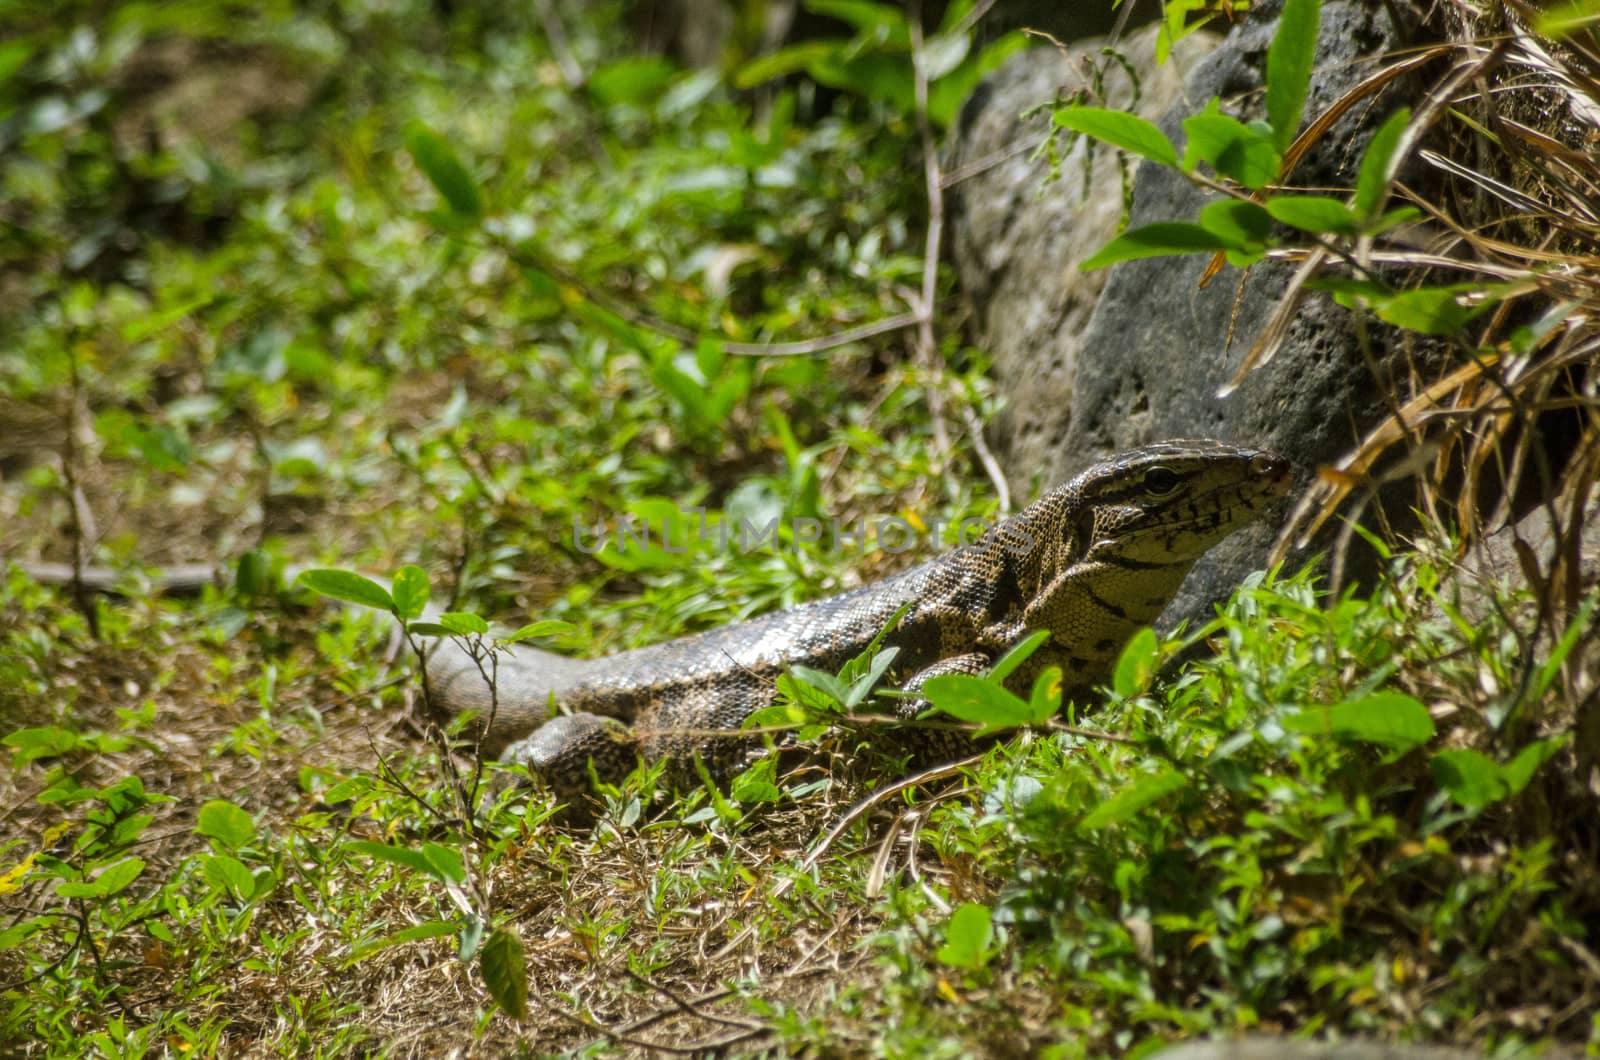 A golden tegu lizard, latin name Tupinambis teguixin, known locally as a sally painter, lurking in the rainforest in Tobago.